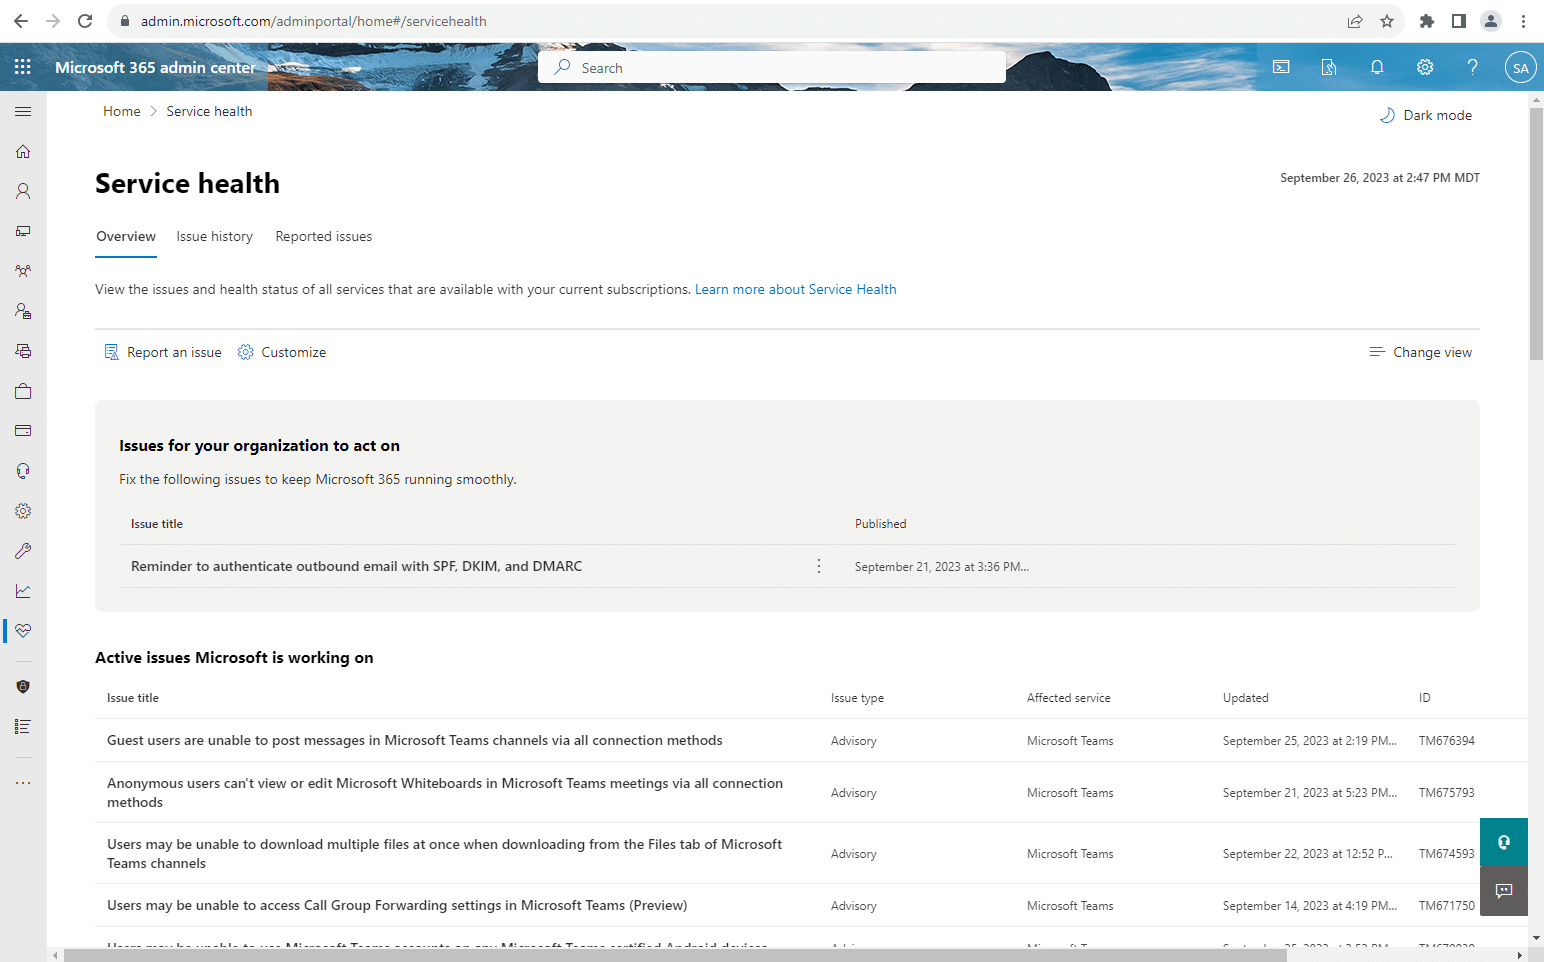 Screenshot: Page with view of current issues in service health